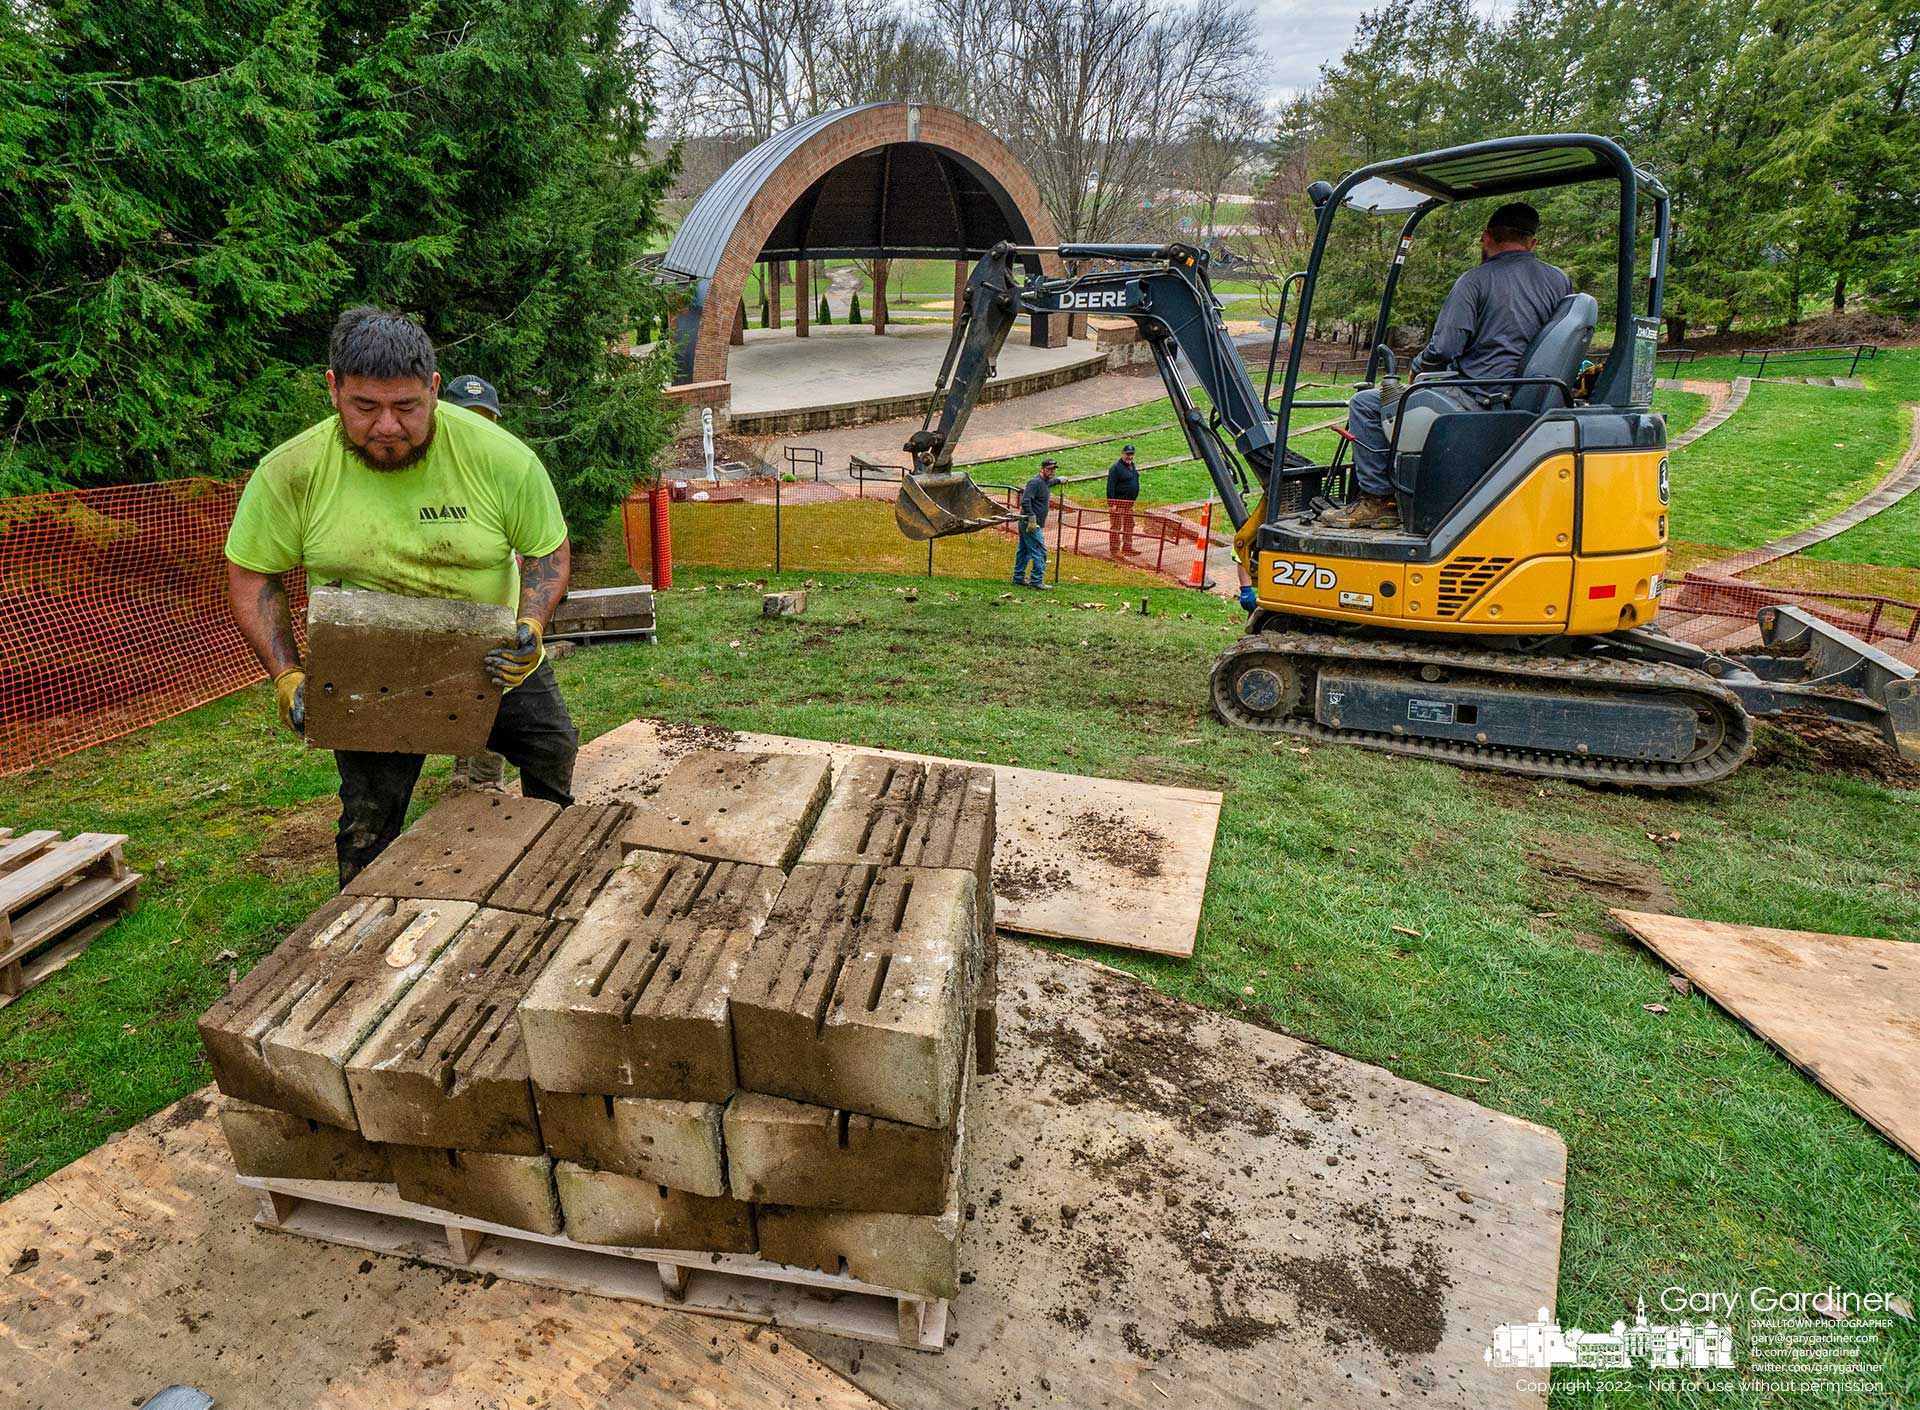 Workers remove blocks from a retaining wall at the Alum Creek Park Amphitheater where it will be stabilized and rebuilt with new blocks. My Final Photo for April 6, 2022.